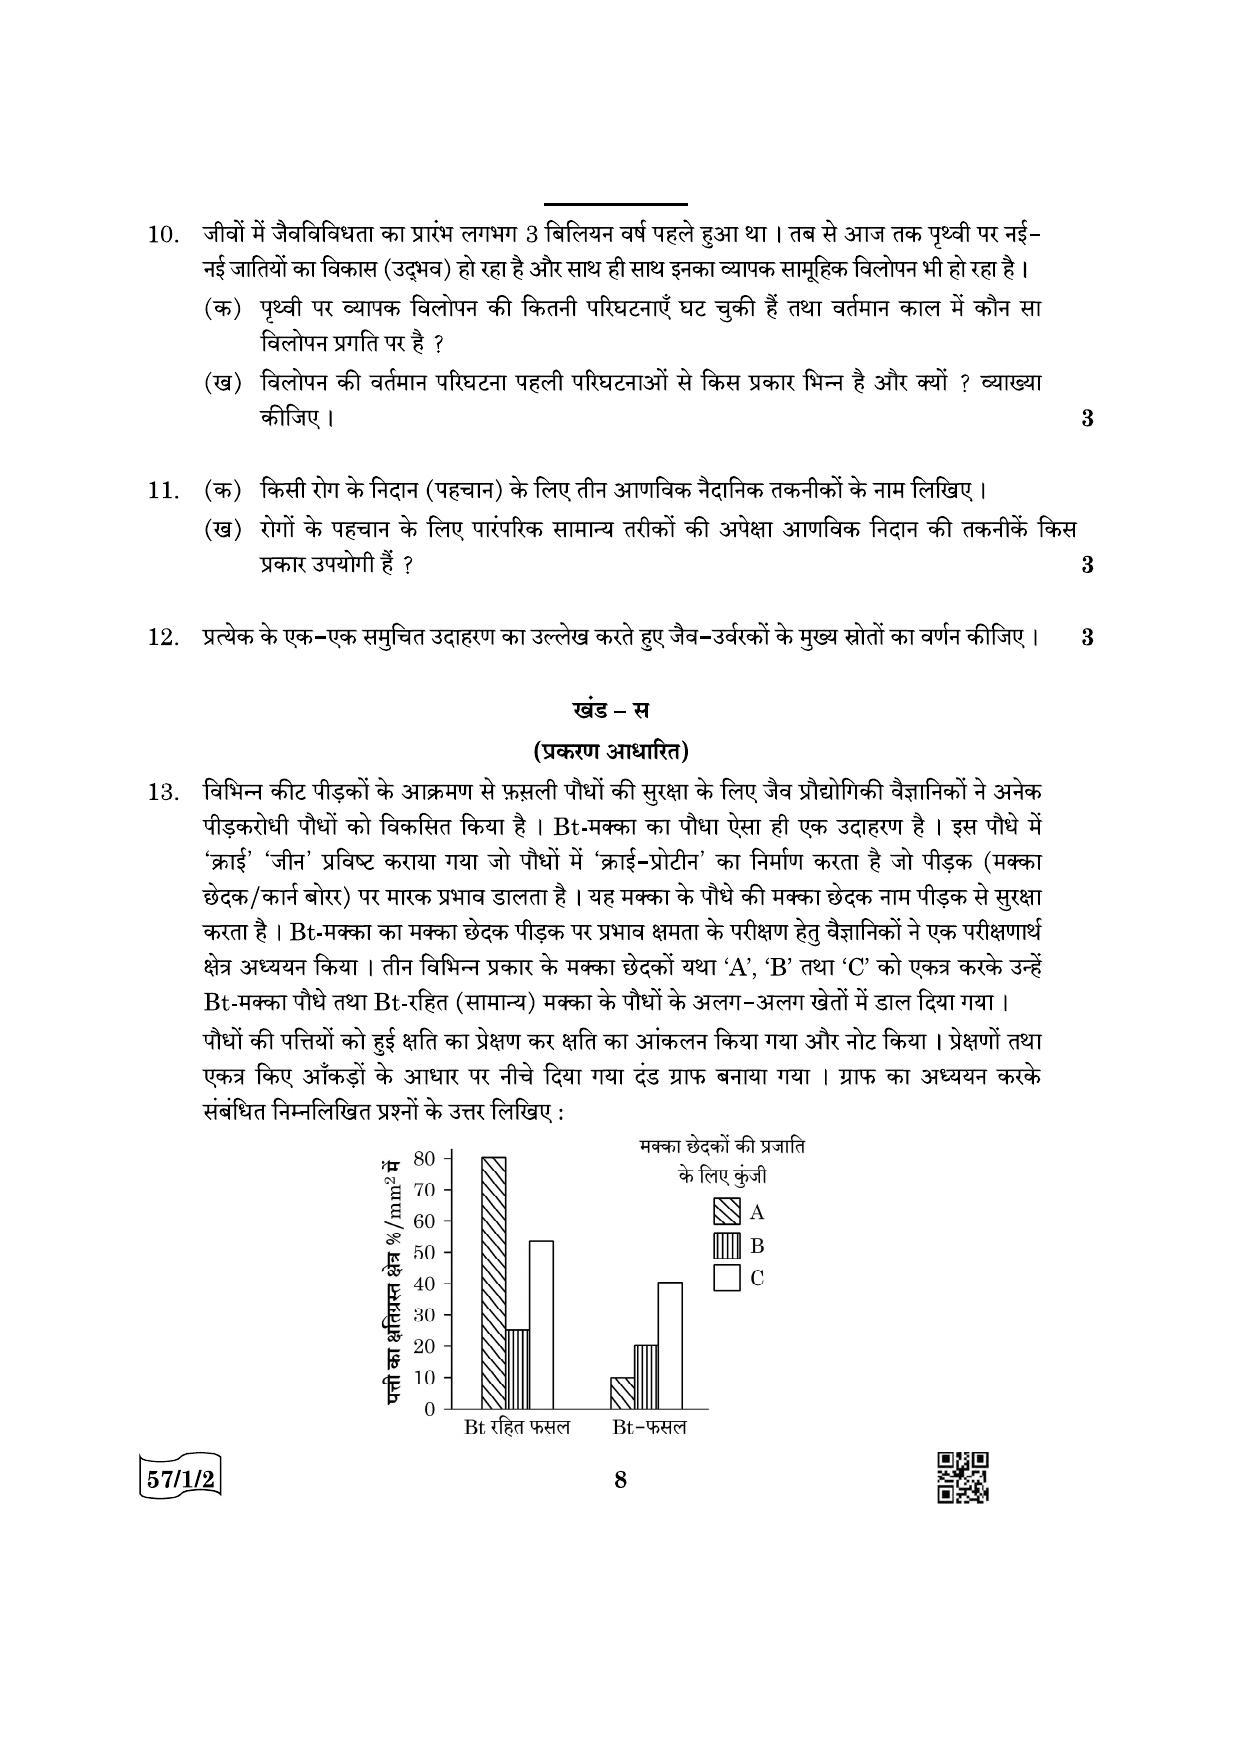 CBSE Class 12 57-1-2 Biology 2022 Question Paper - Page 8